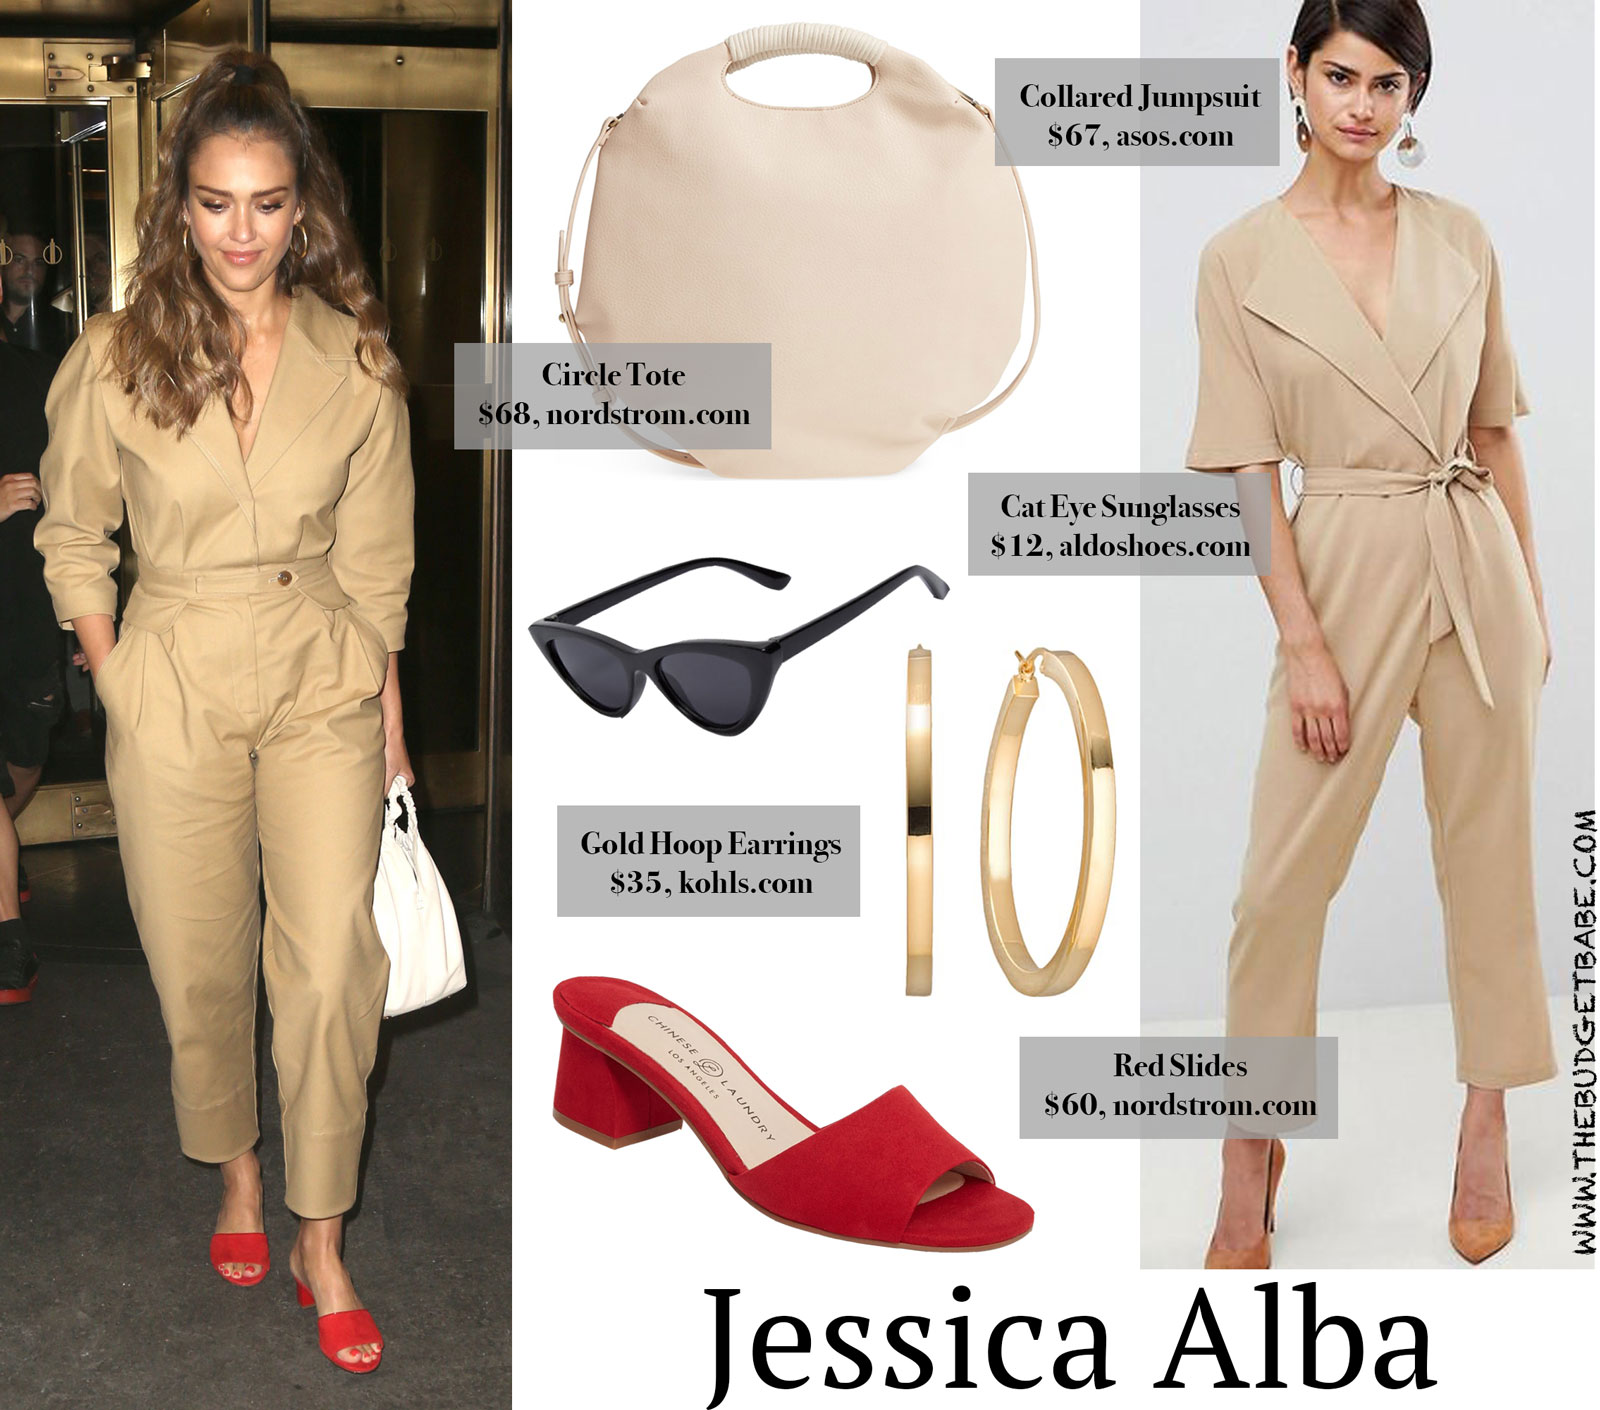 Jessica Alba Tan Jumpsuit and Red Slides Look for Less